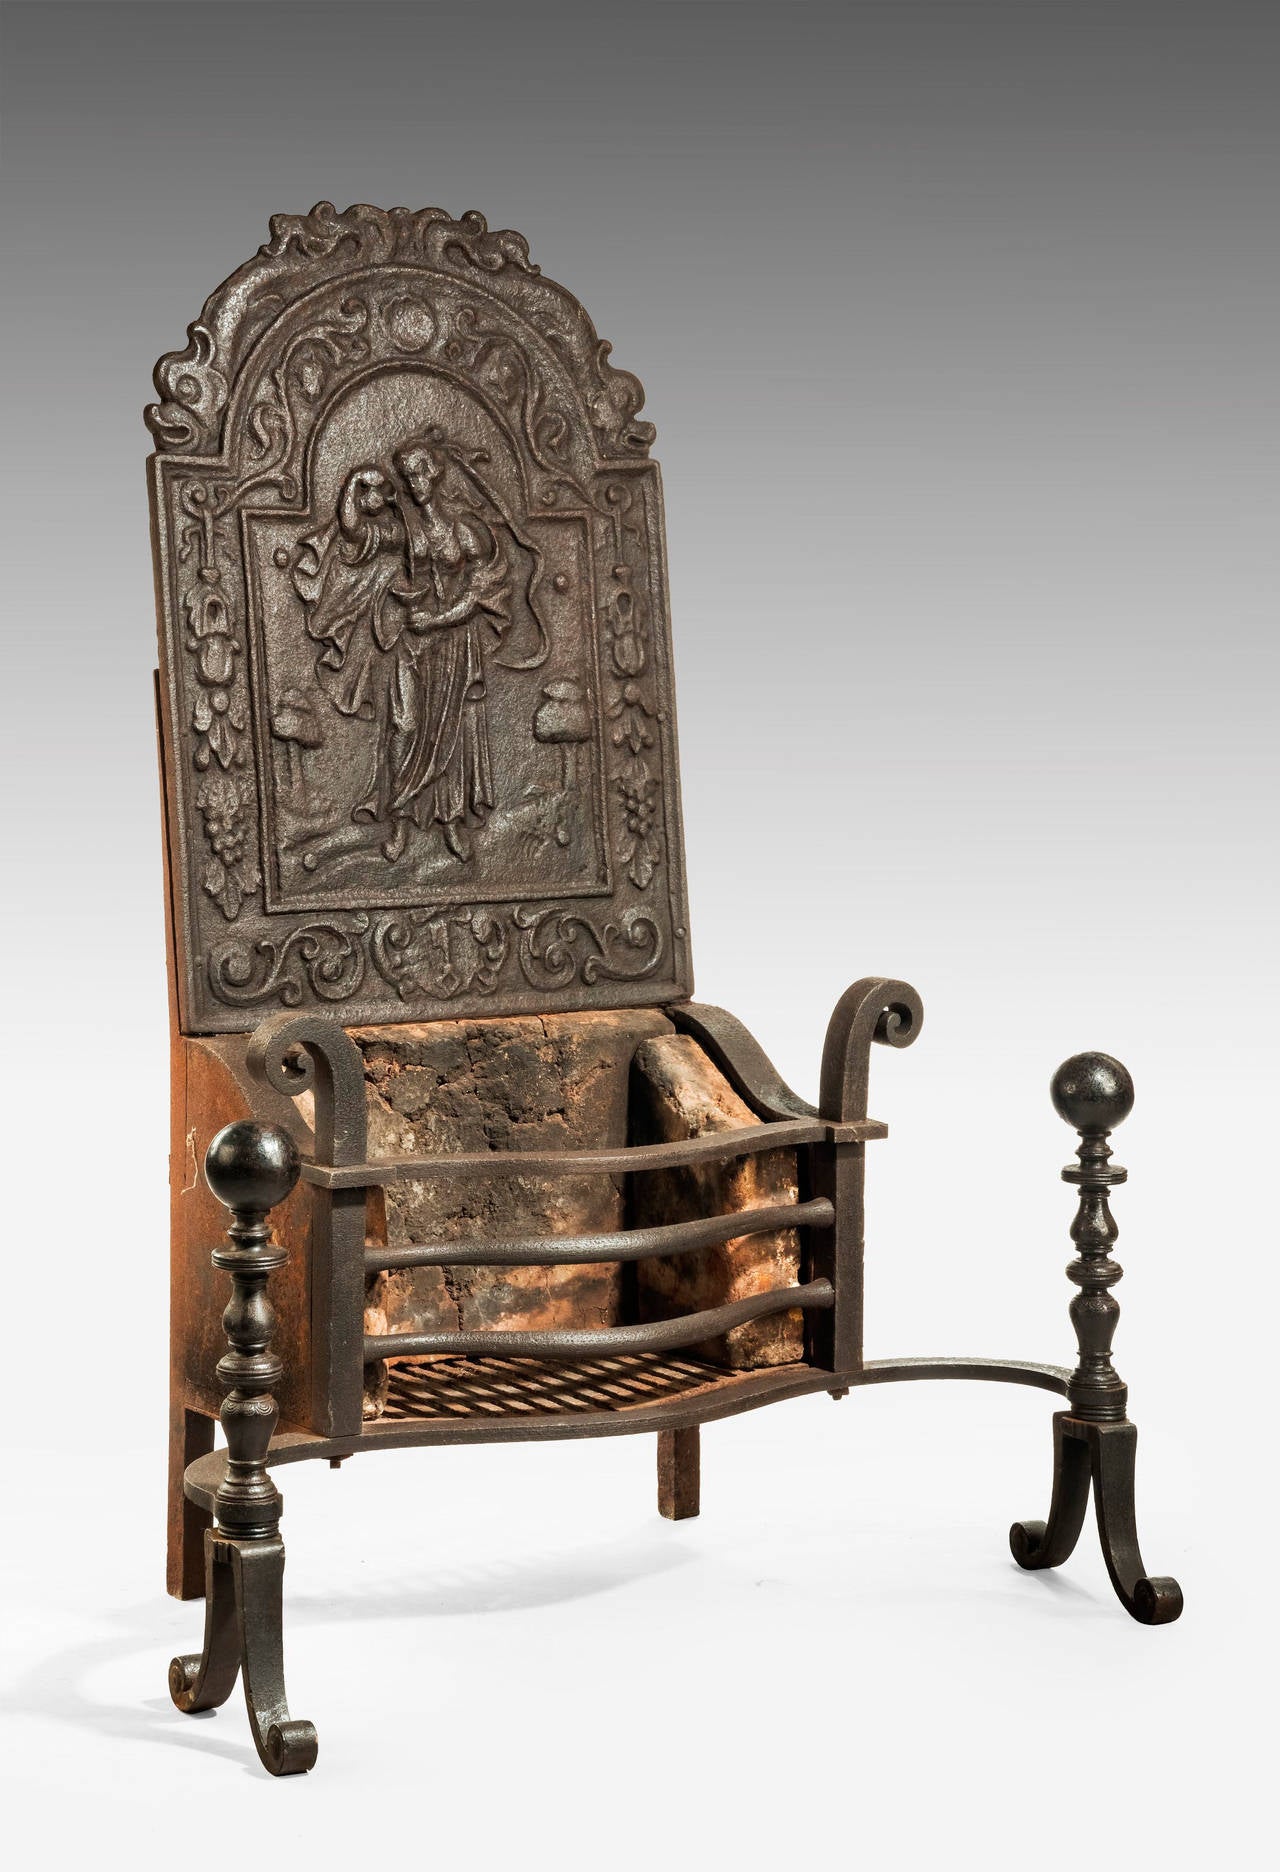 A cast iron grate with practically unusual high top, the panel with a maiden pouring liquid into a neoclassic goblet.

